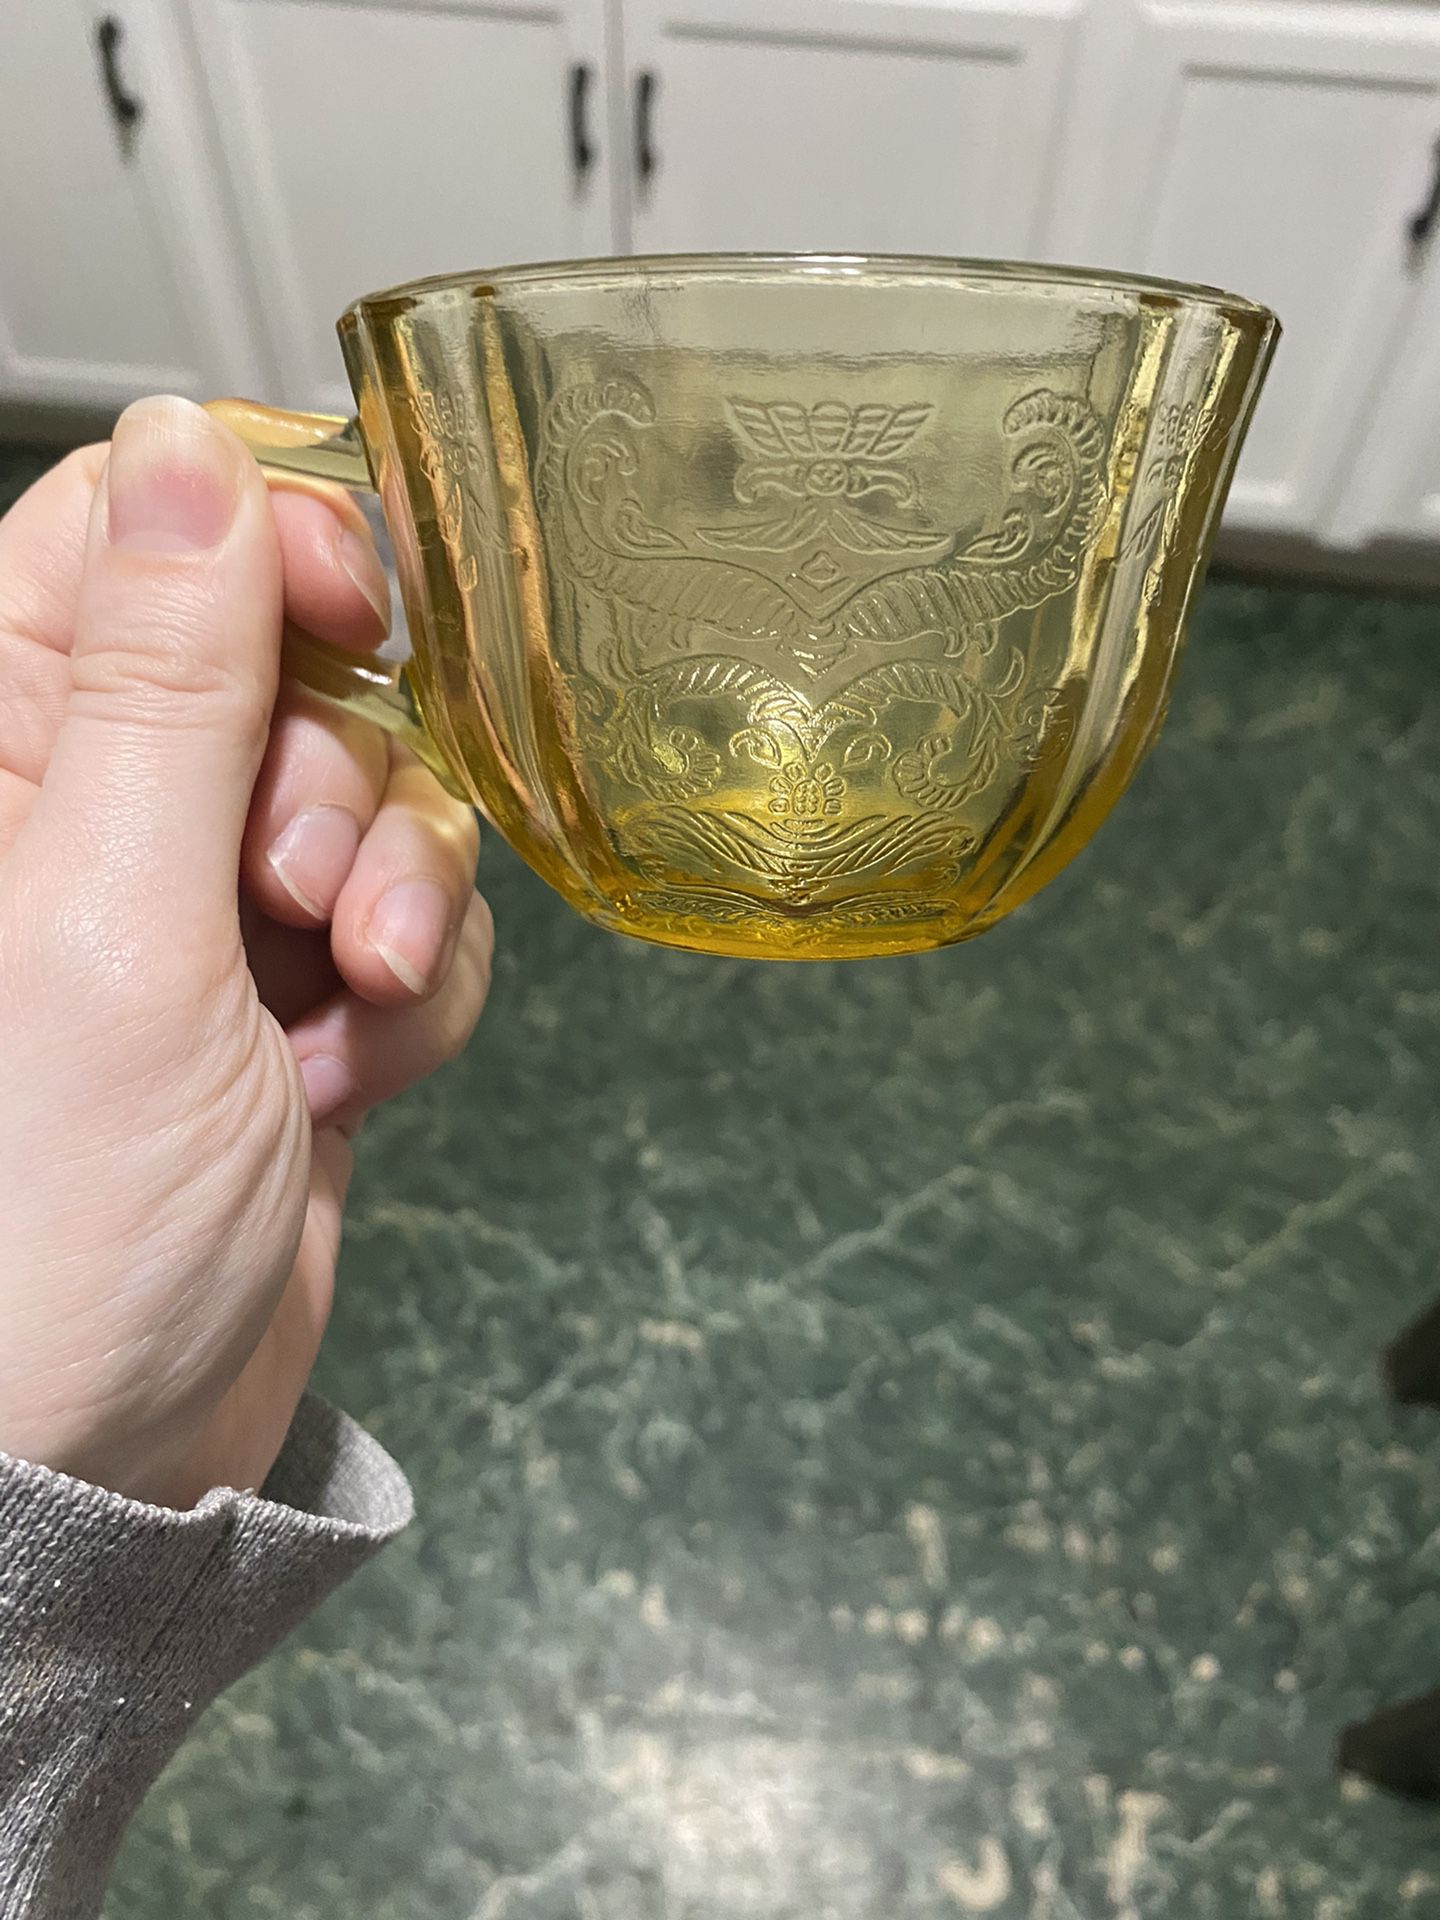 1930-Federal Glass Company-Madrid Pattern-Yellow Depression Glass Tea Cup